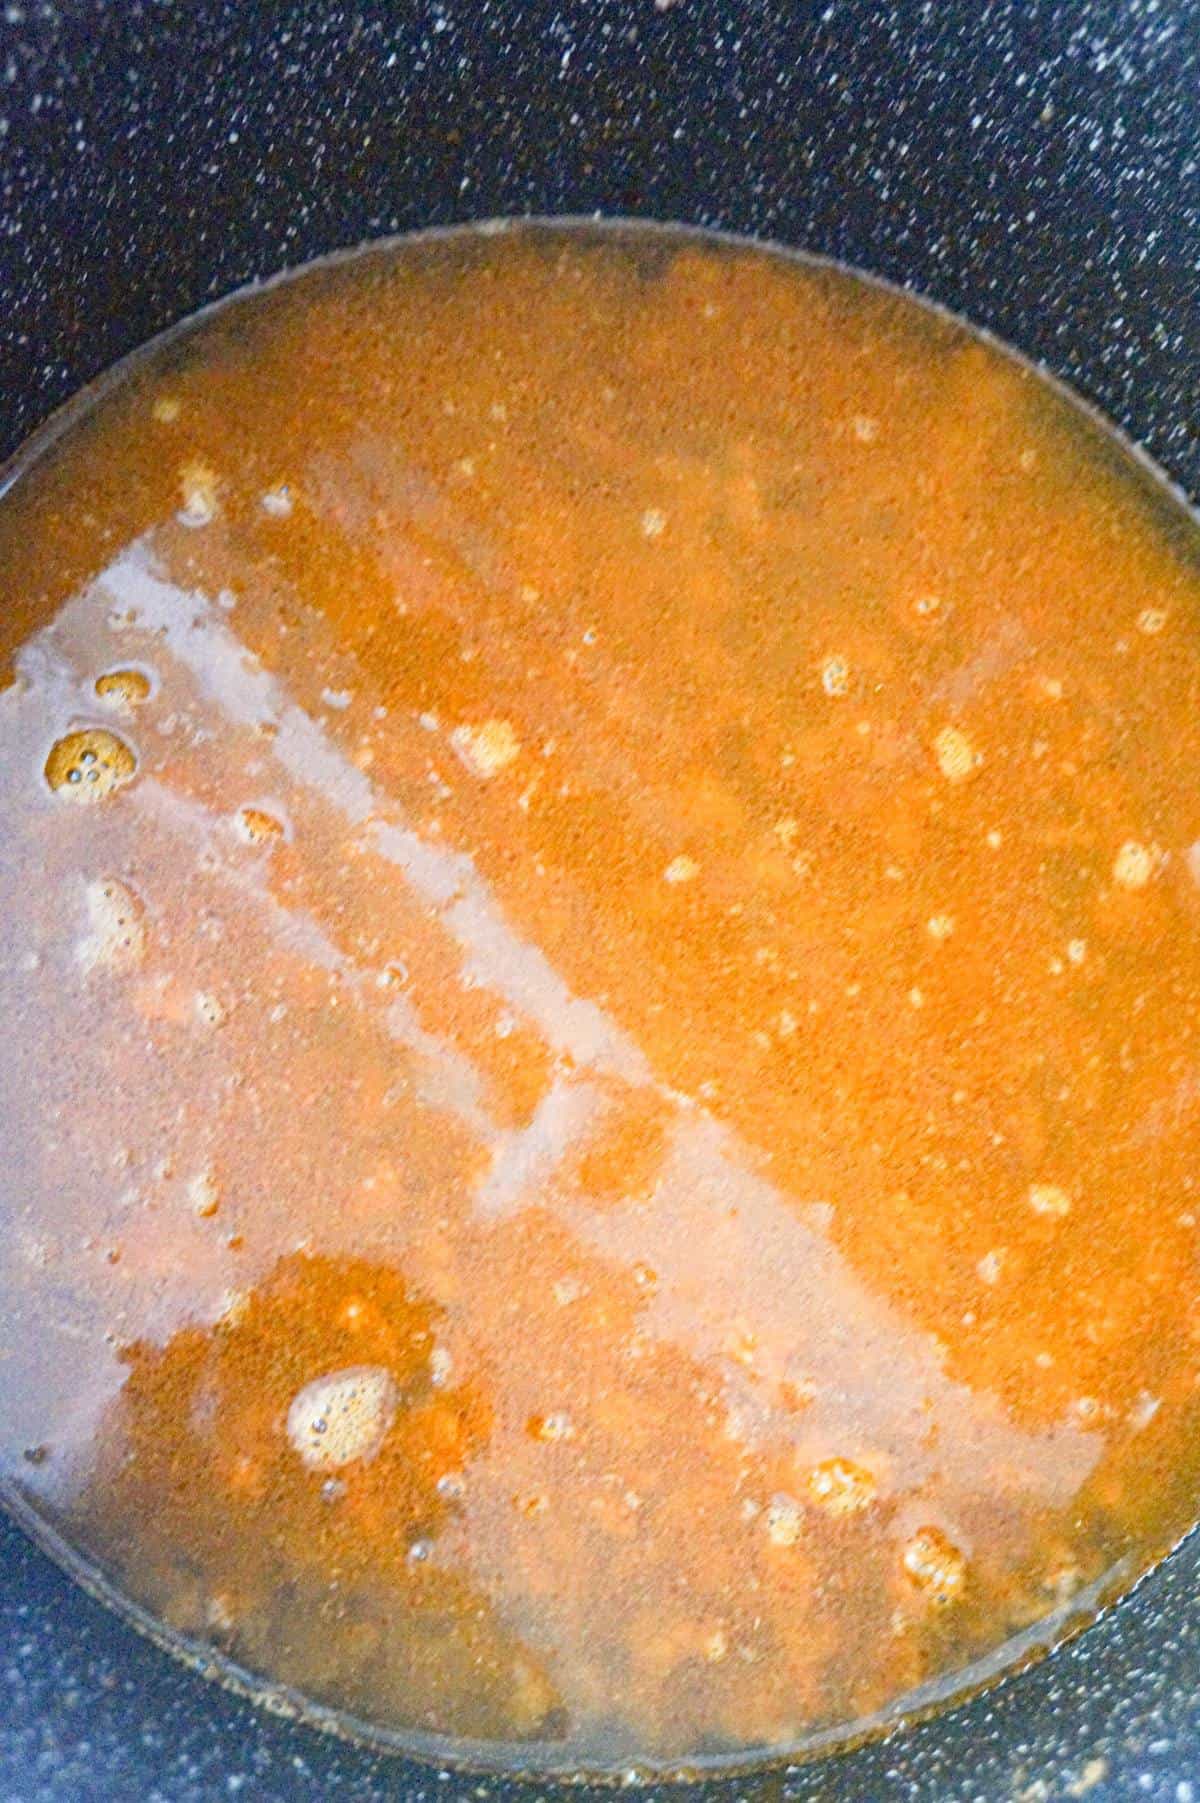 water and chili seasoning in a large pot